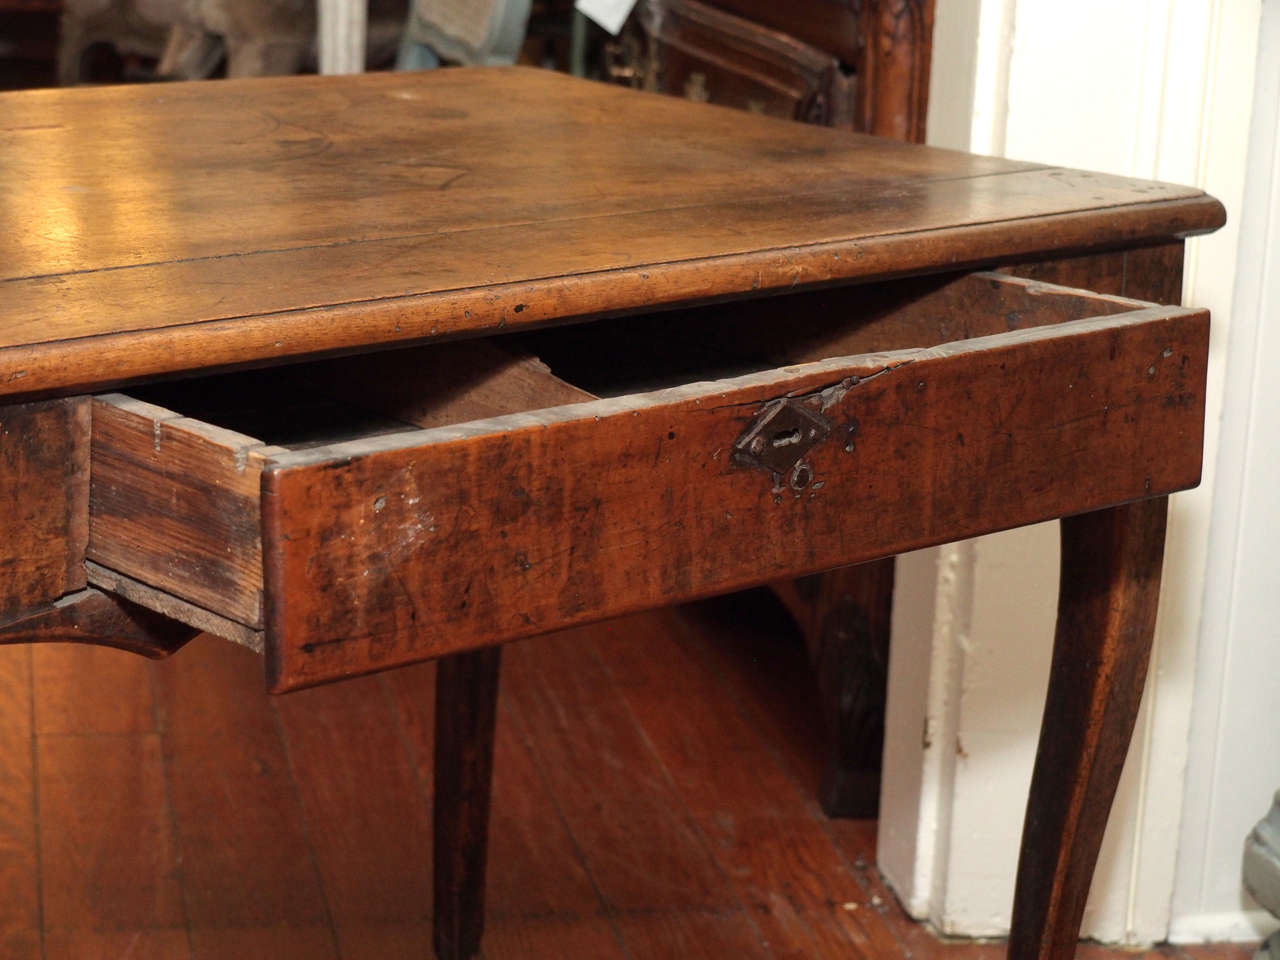 French 18th Century Side Table